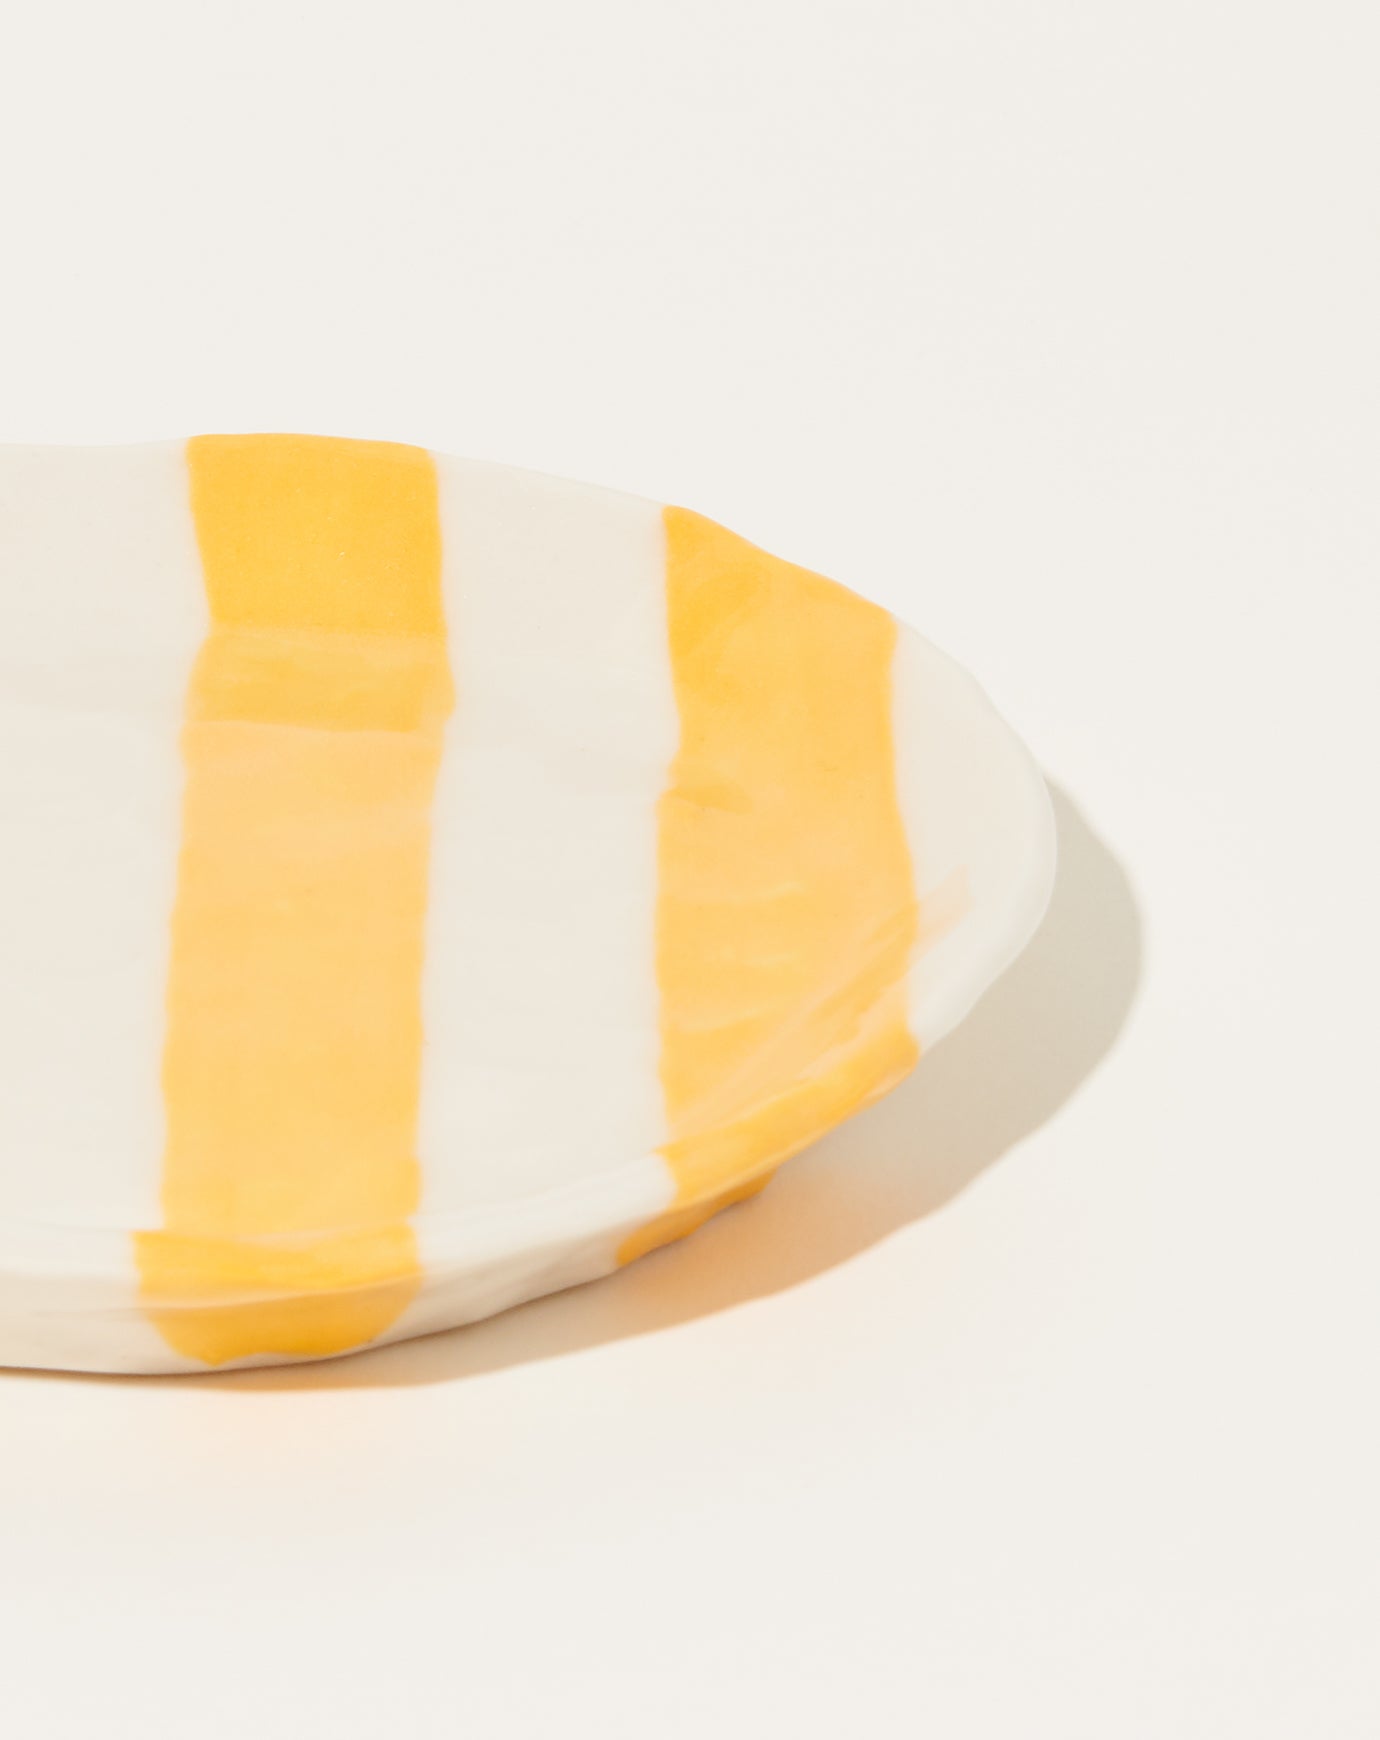 Isabel Halley Ribbon Plate in Goldenrod